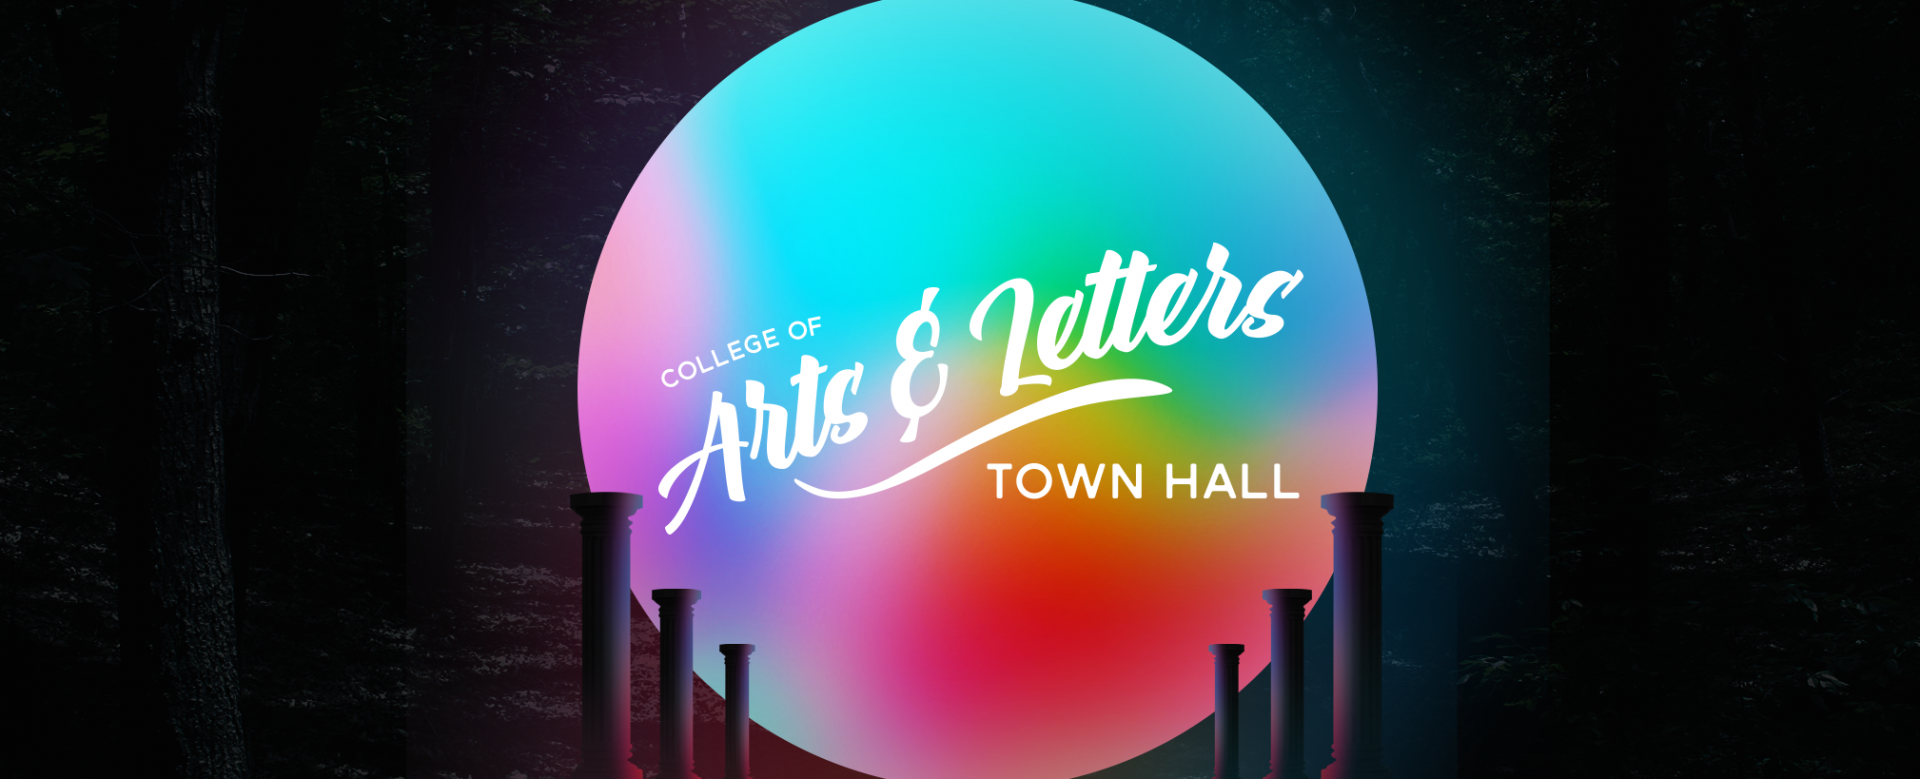 ARTS & LETTERS TOWN HALL MEETING